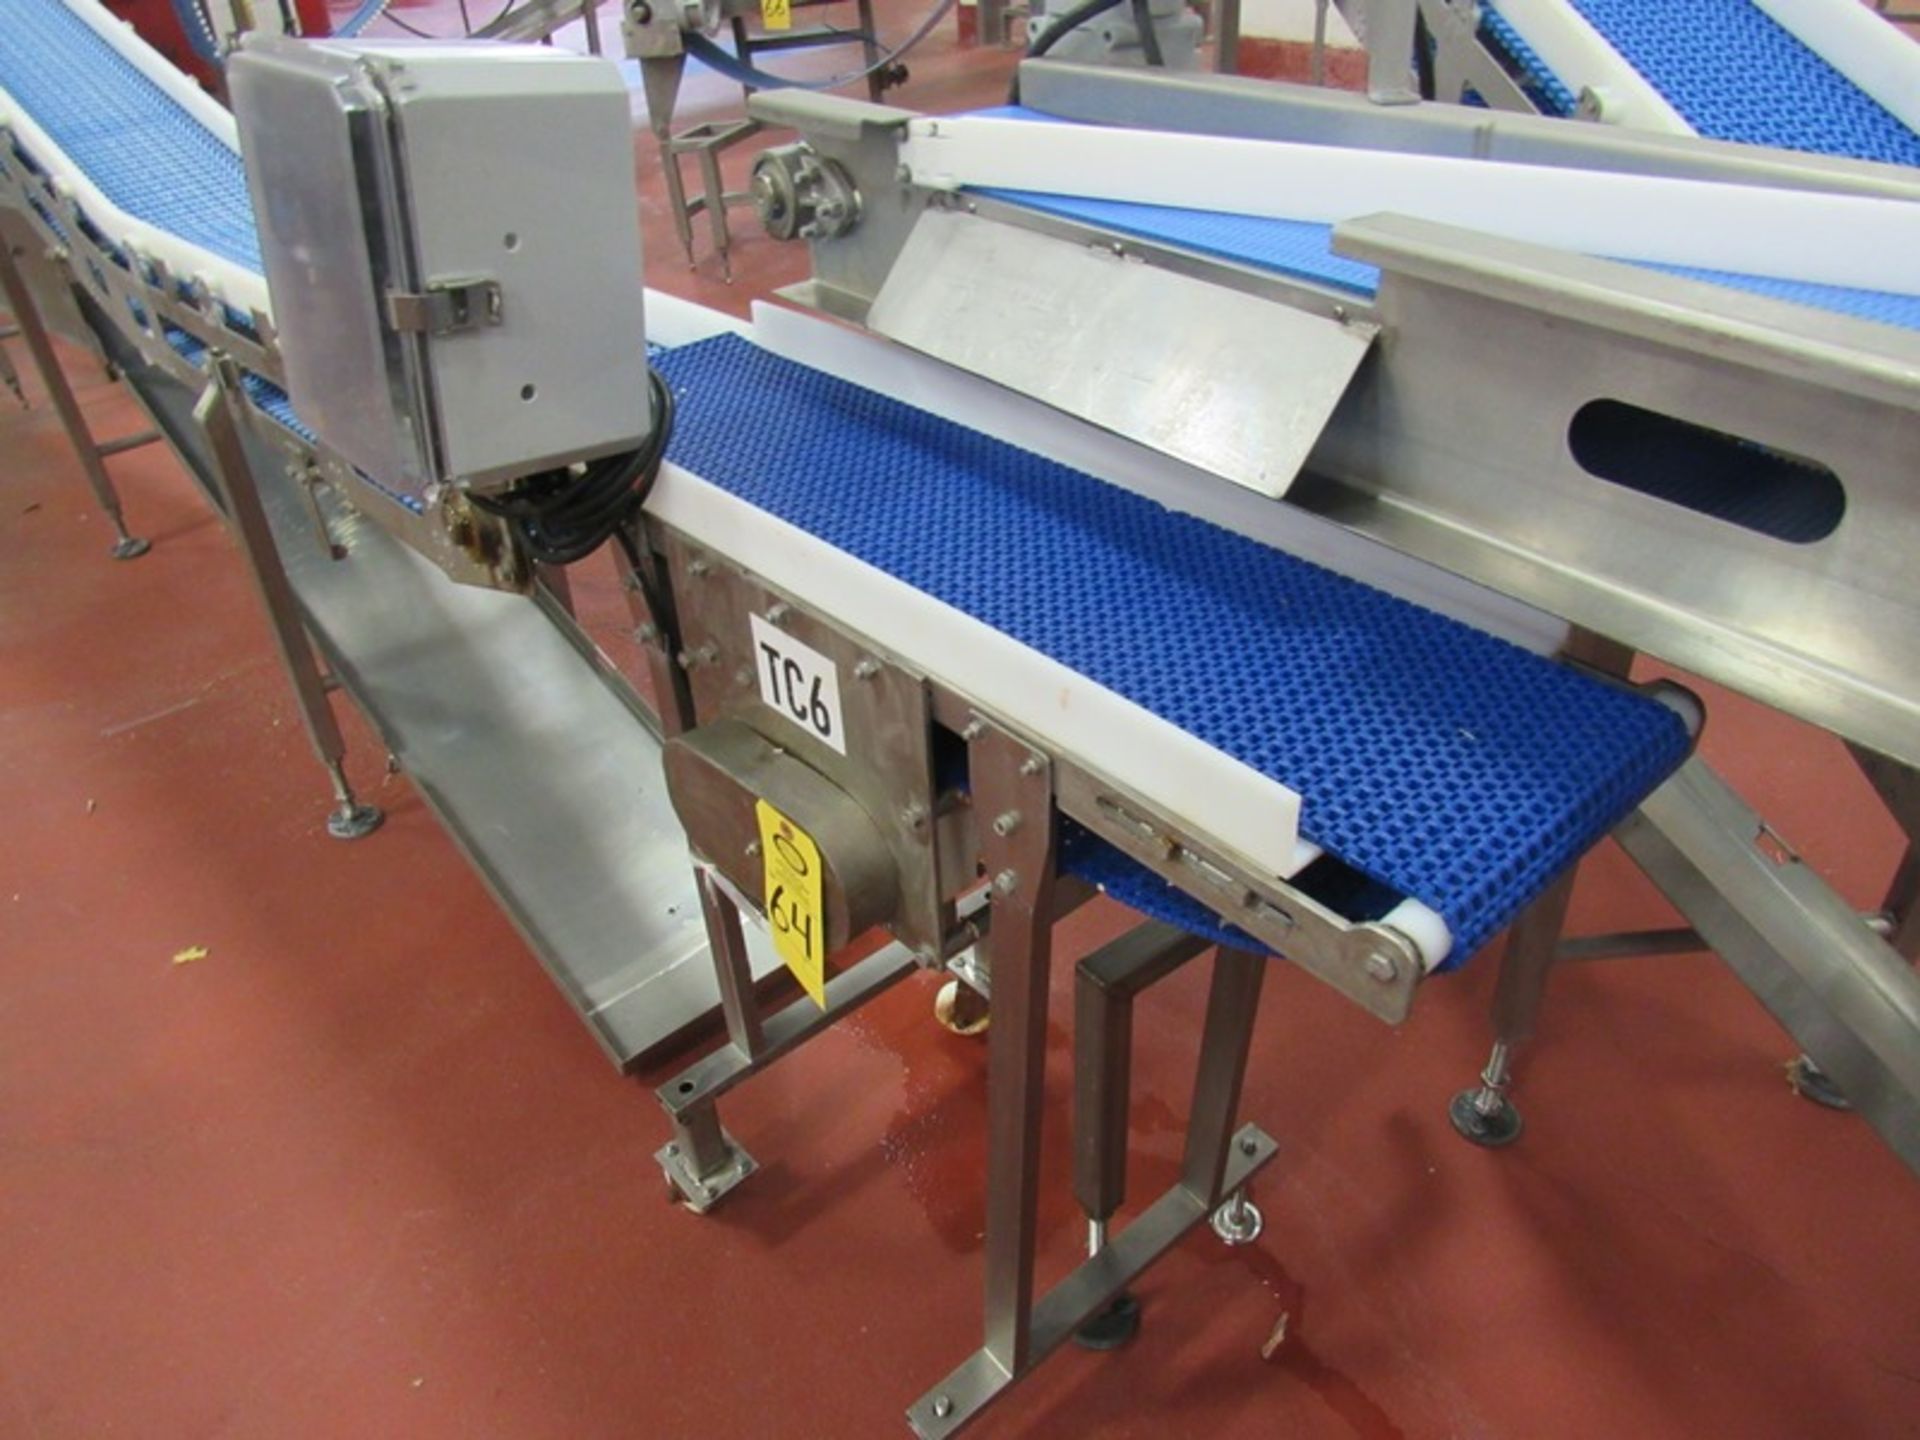 Portable Stainless Steel Conveyor, 9" W X 38" L plastic belt, V.F.D. (Required Loading Fee $50.00